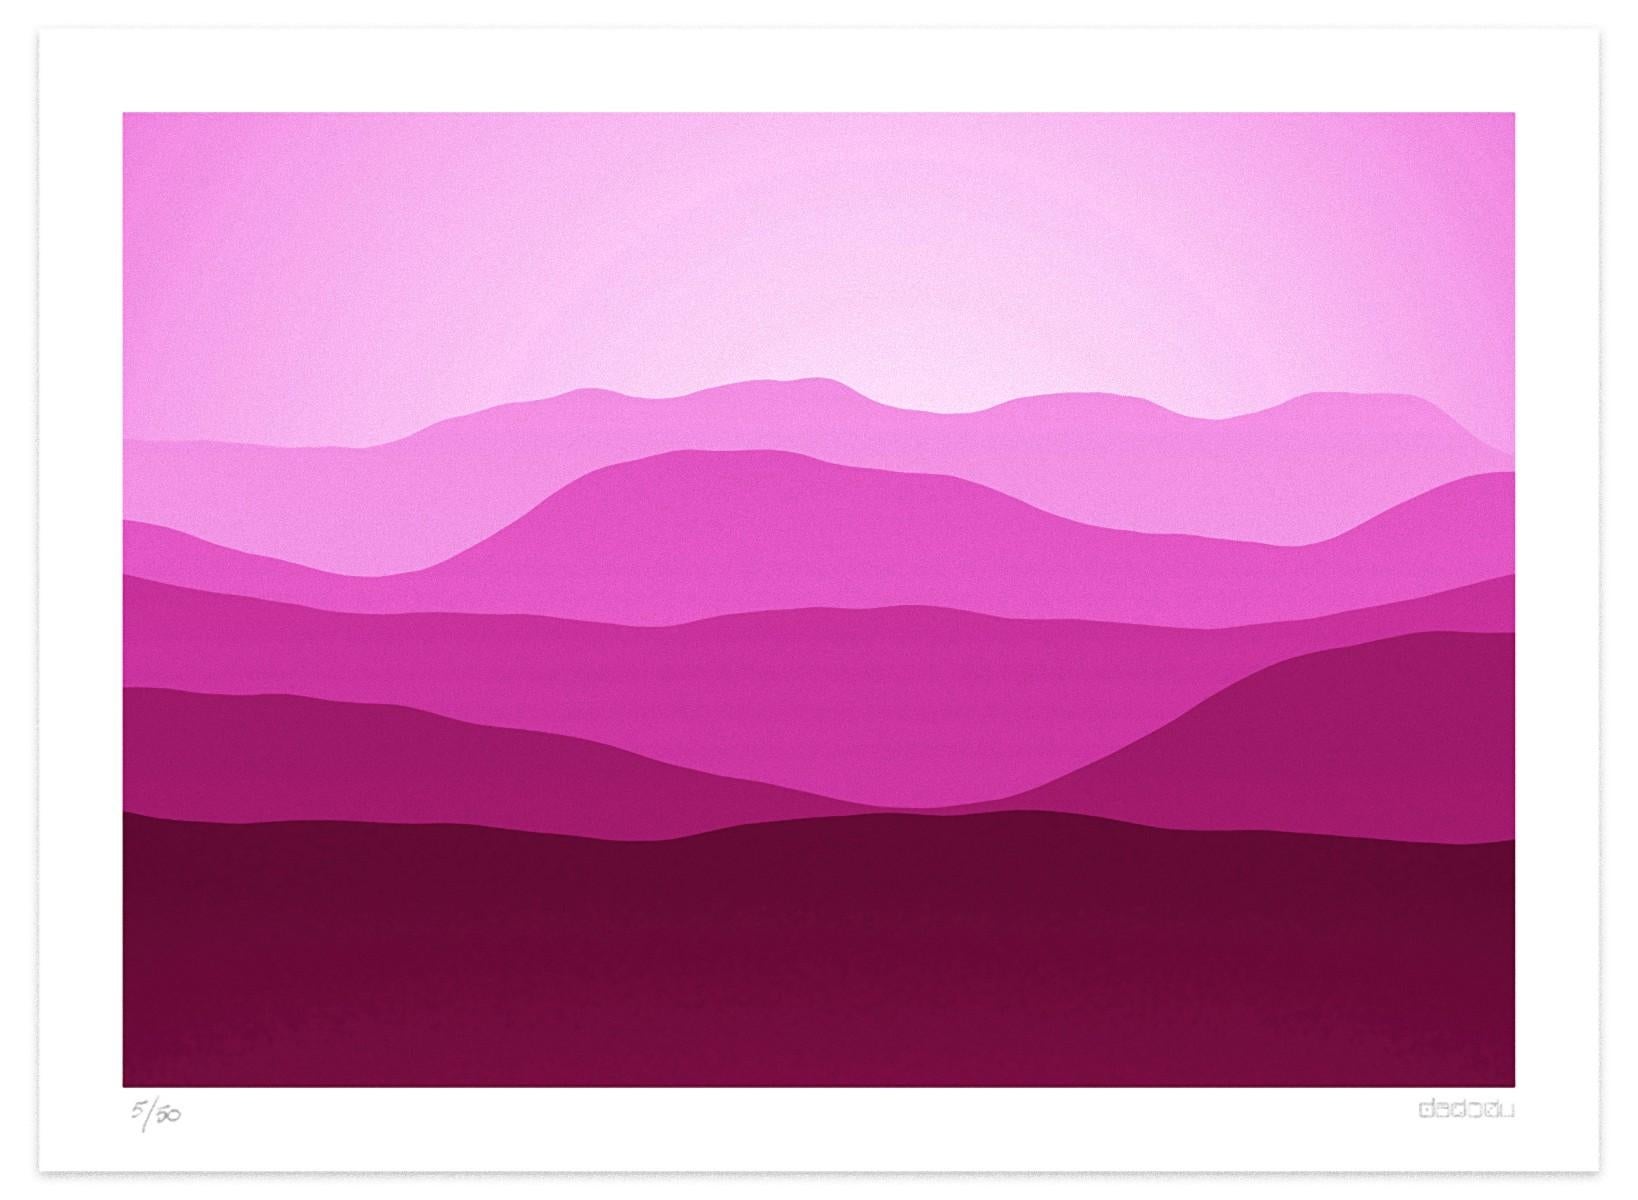 Morning Breeze  is a lovely  giclée print realized by the contemporary artist Dadodu in 2011.

This original artwork represents an aerial view on mountains fading in the distance with a pink light.

Hand-signed on the lower right corner "Dadodu" and